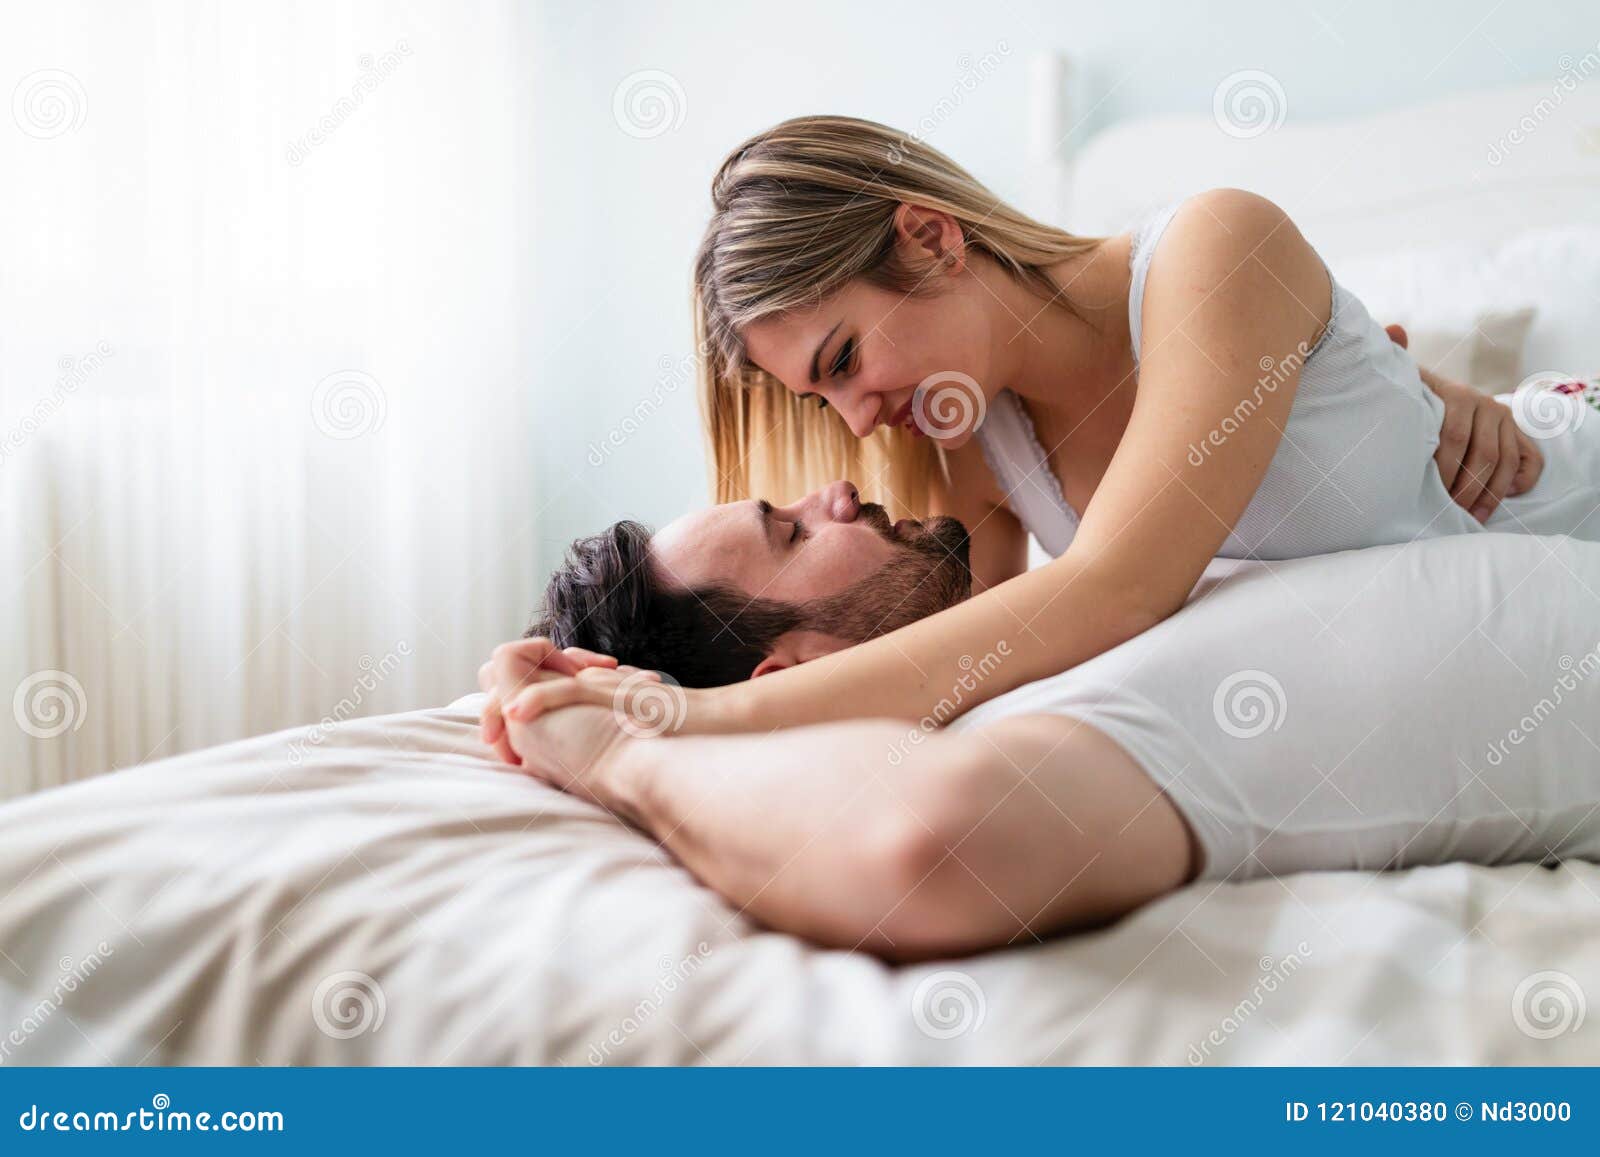 Wife and husband bed romance